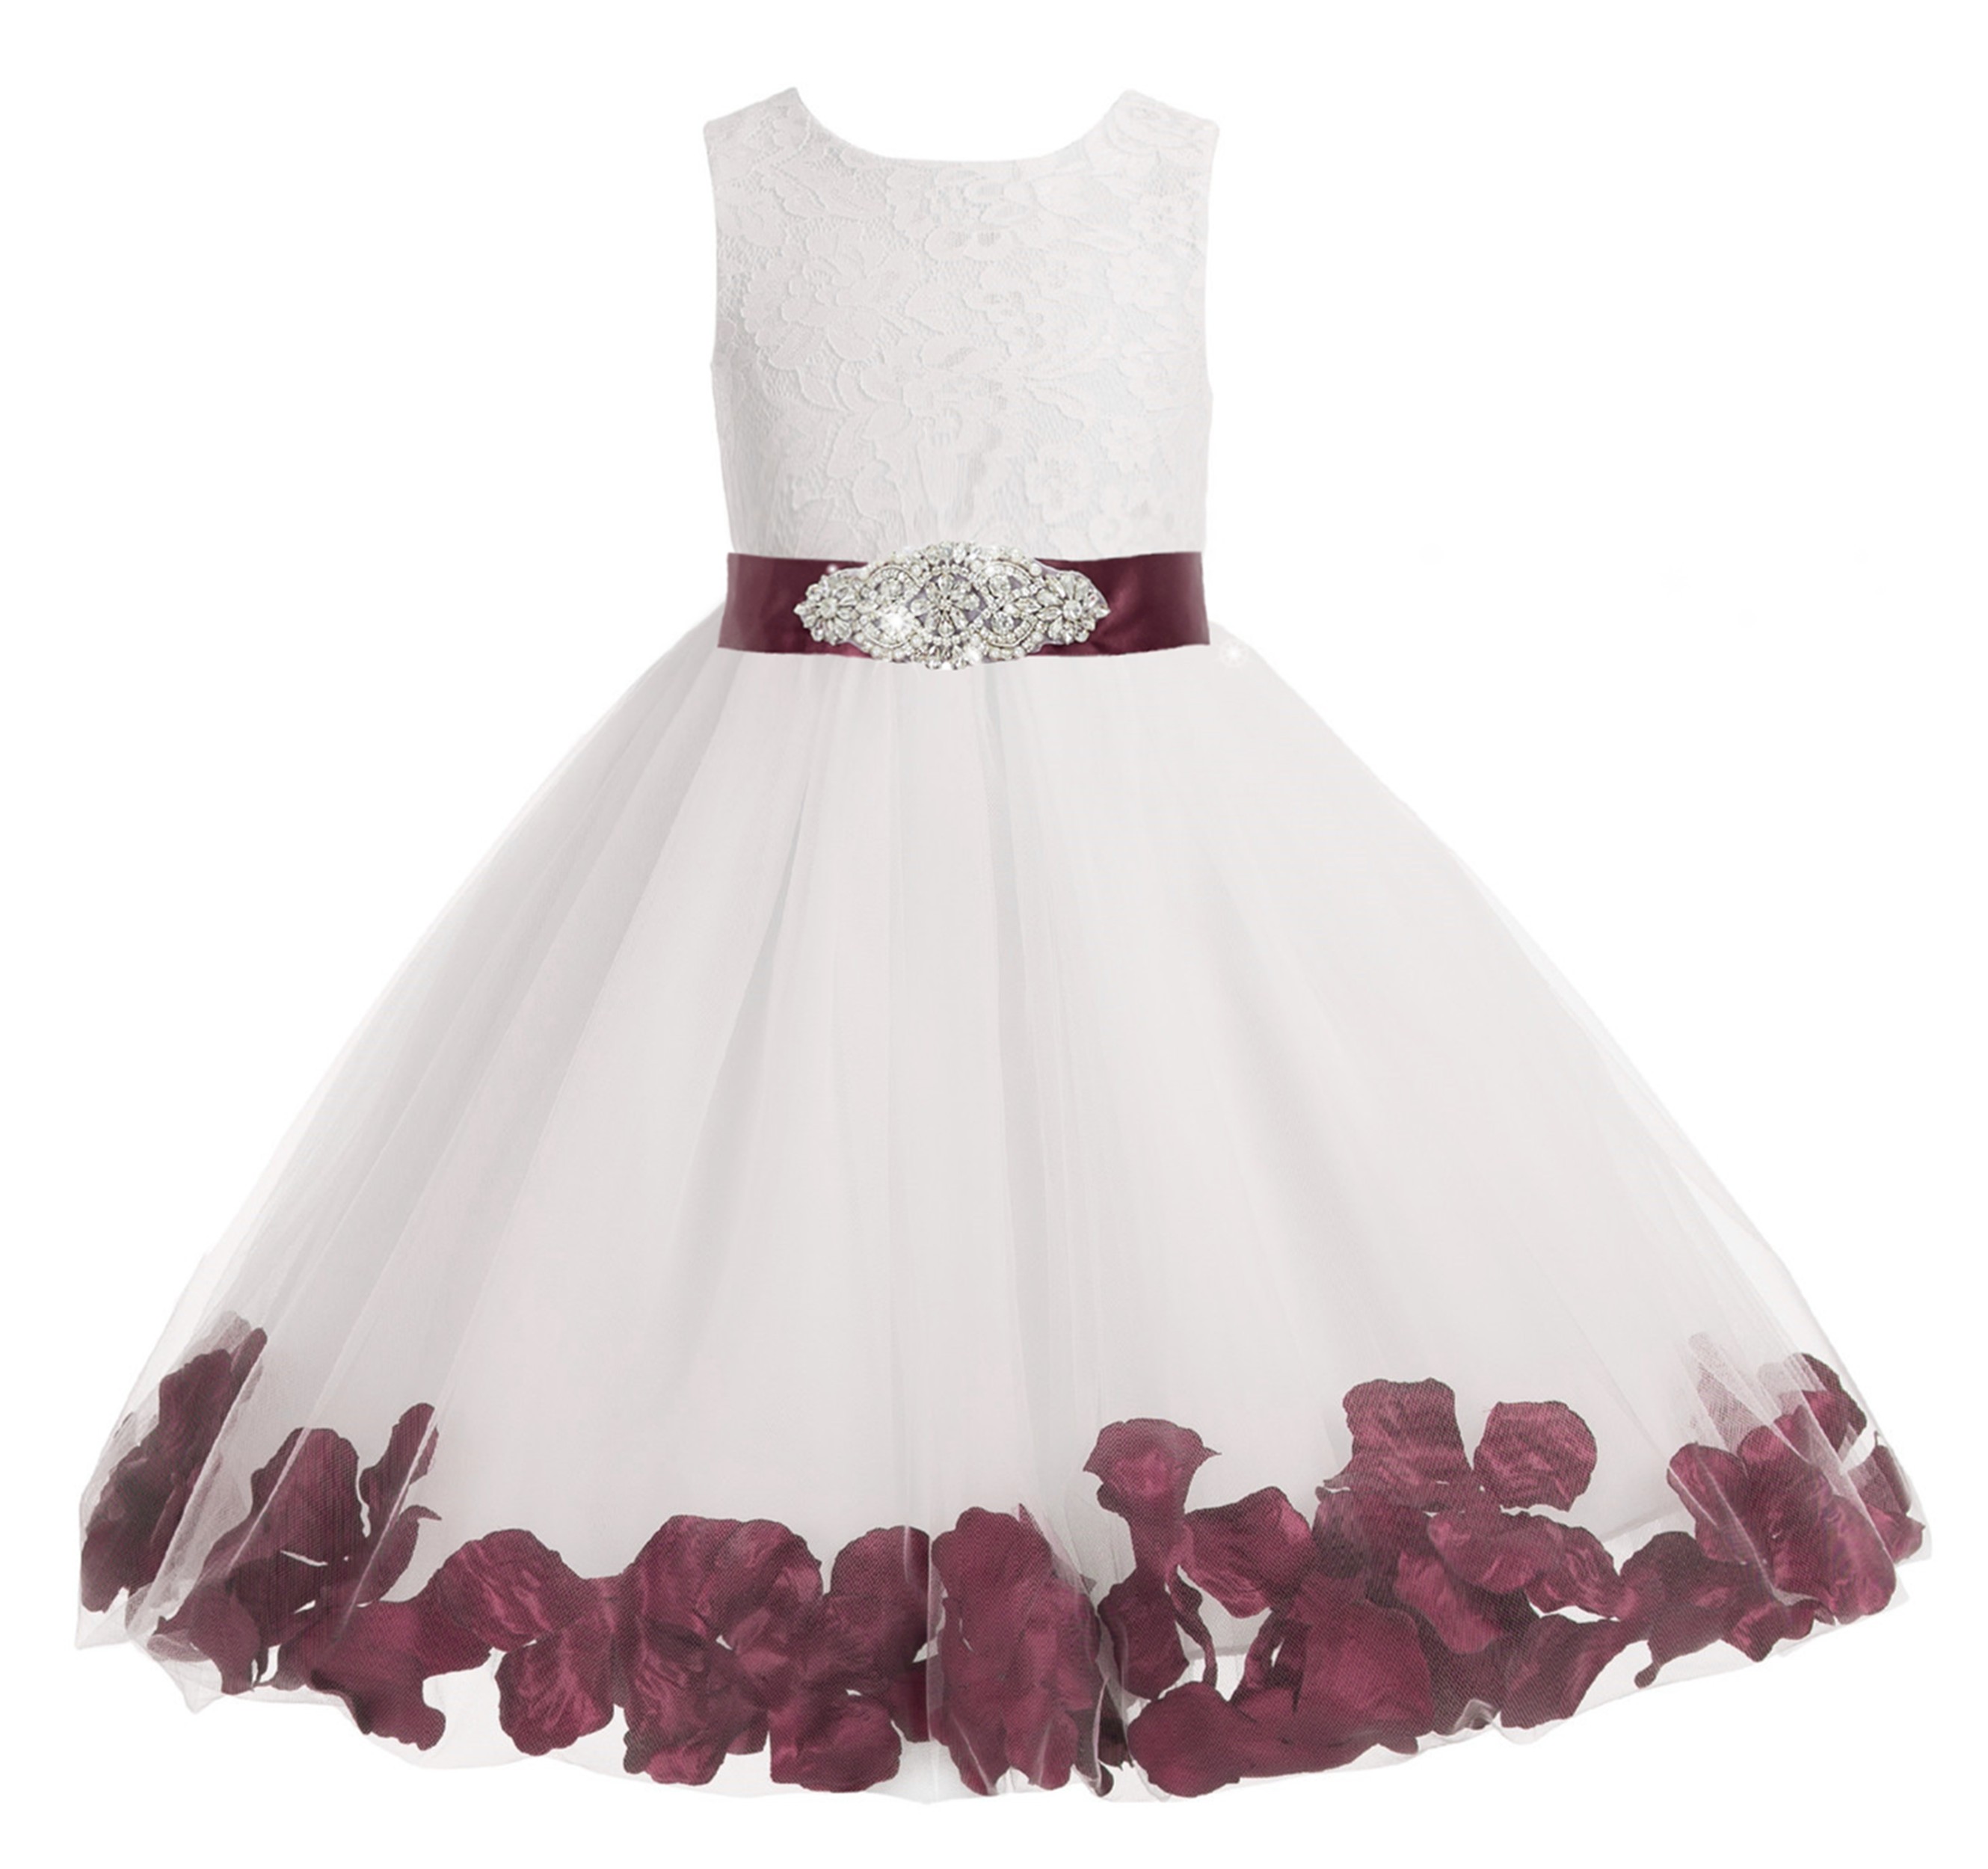 White / Burgundy Floral Lace Heart Cutout Flower Girl Dress with Petals 185